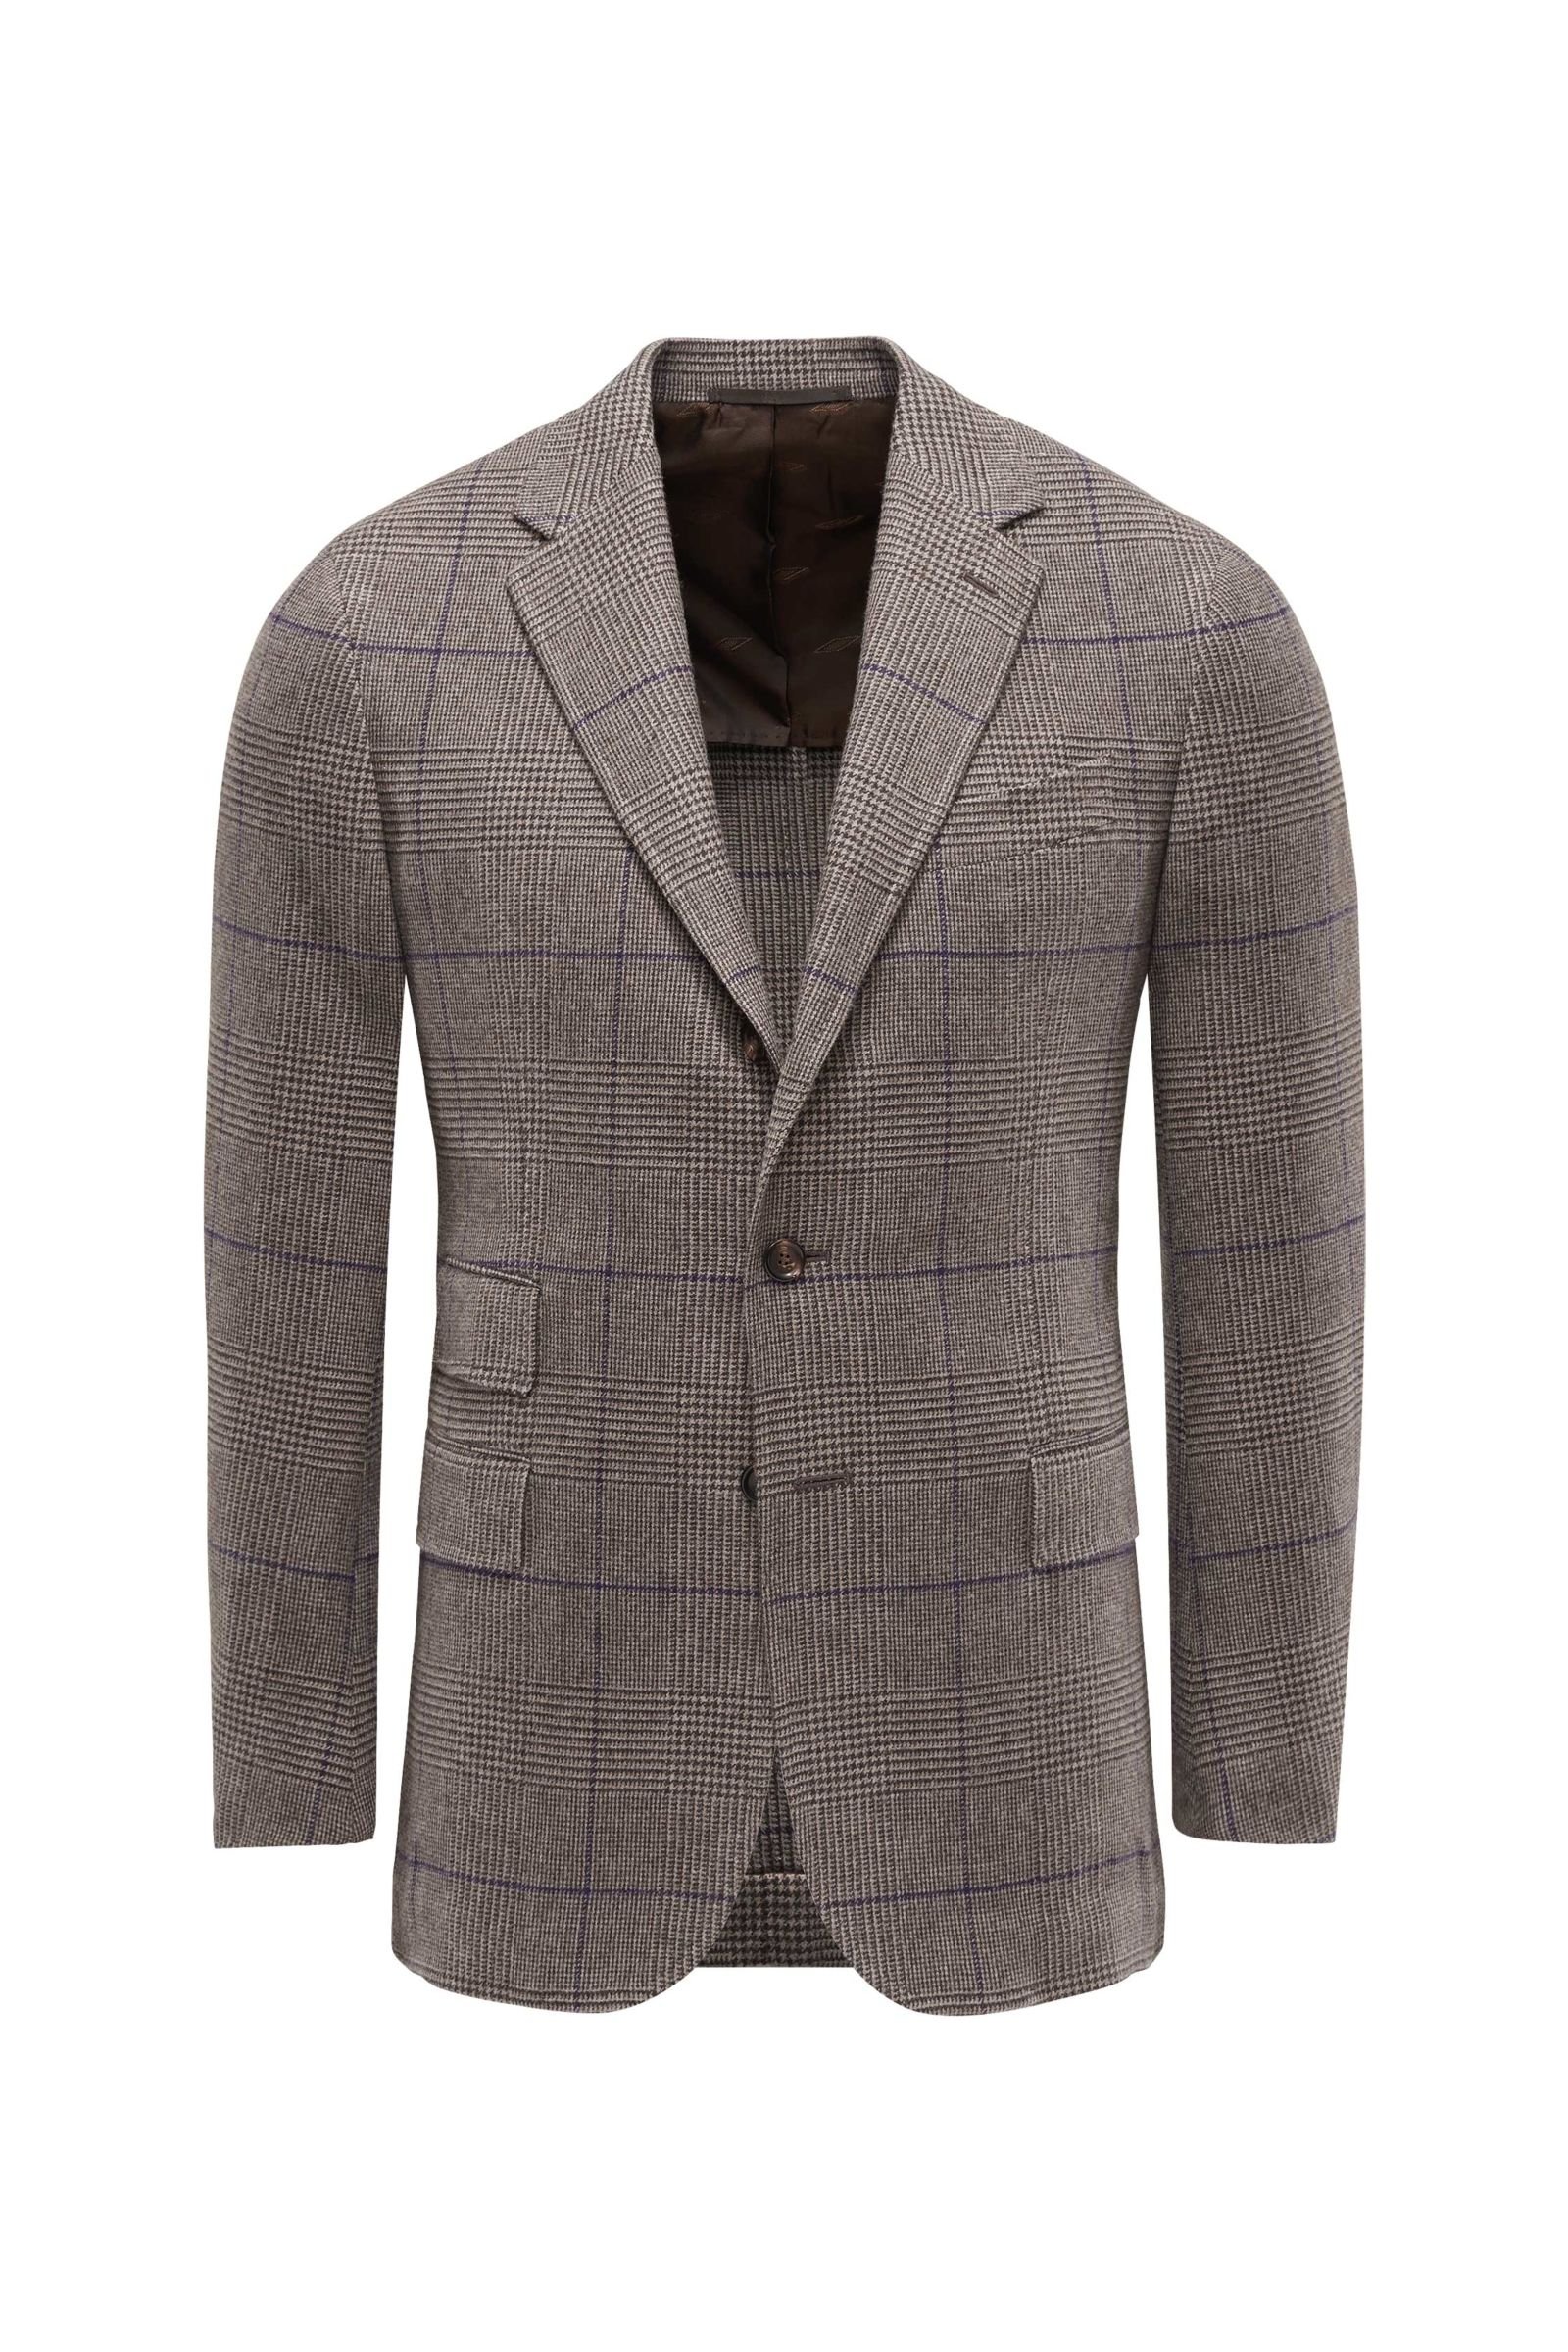 Cashmere smart-casual jacket 'Vincenzo' grey-brown checked